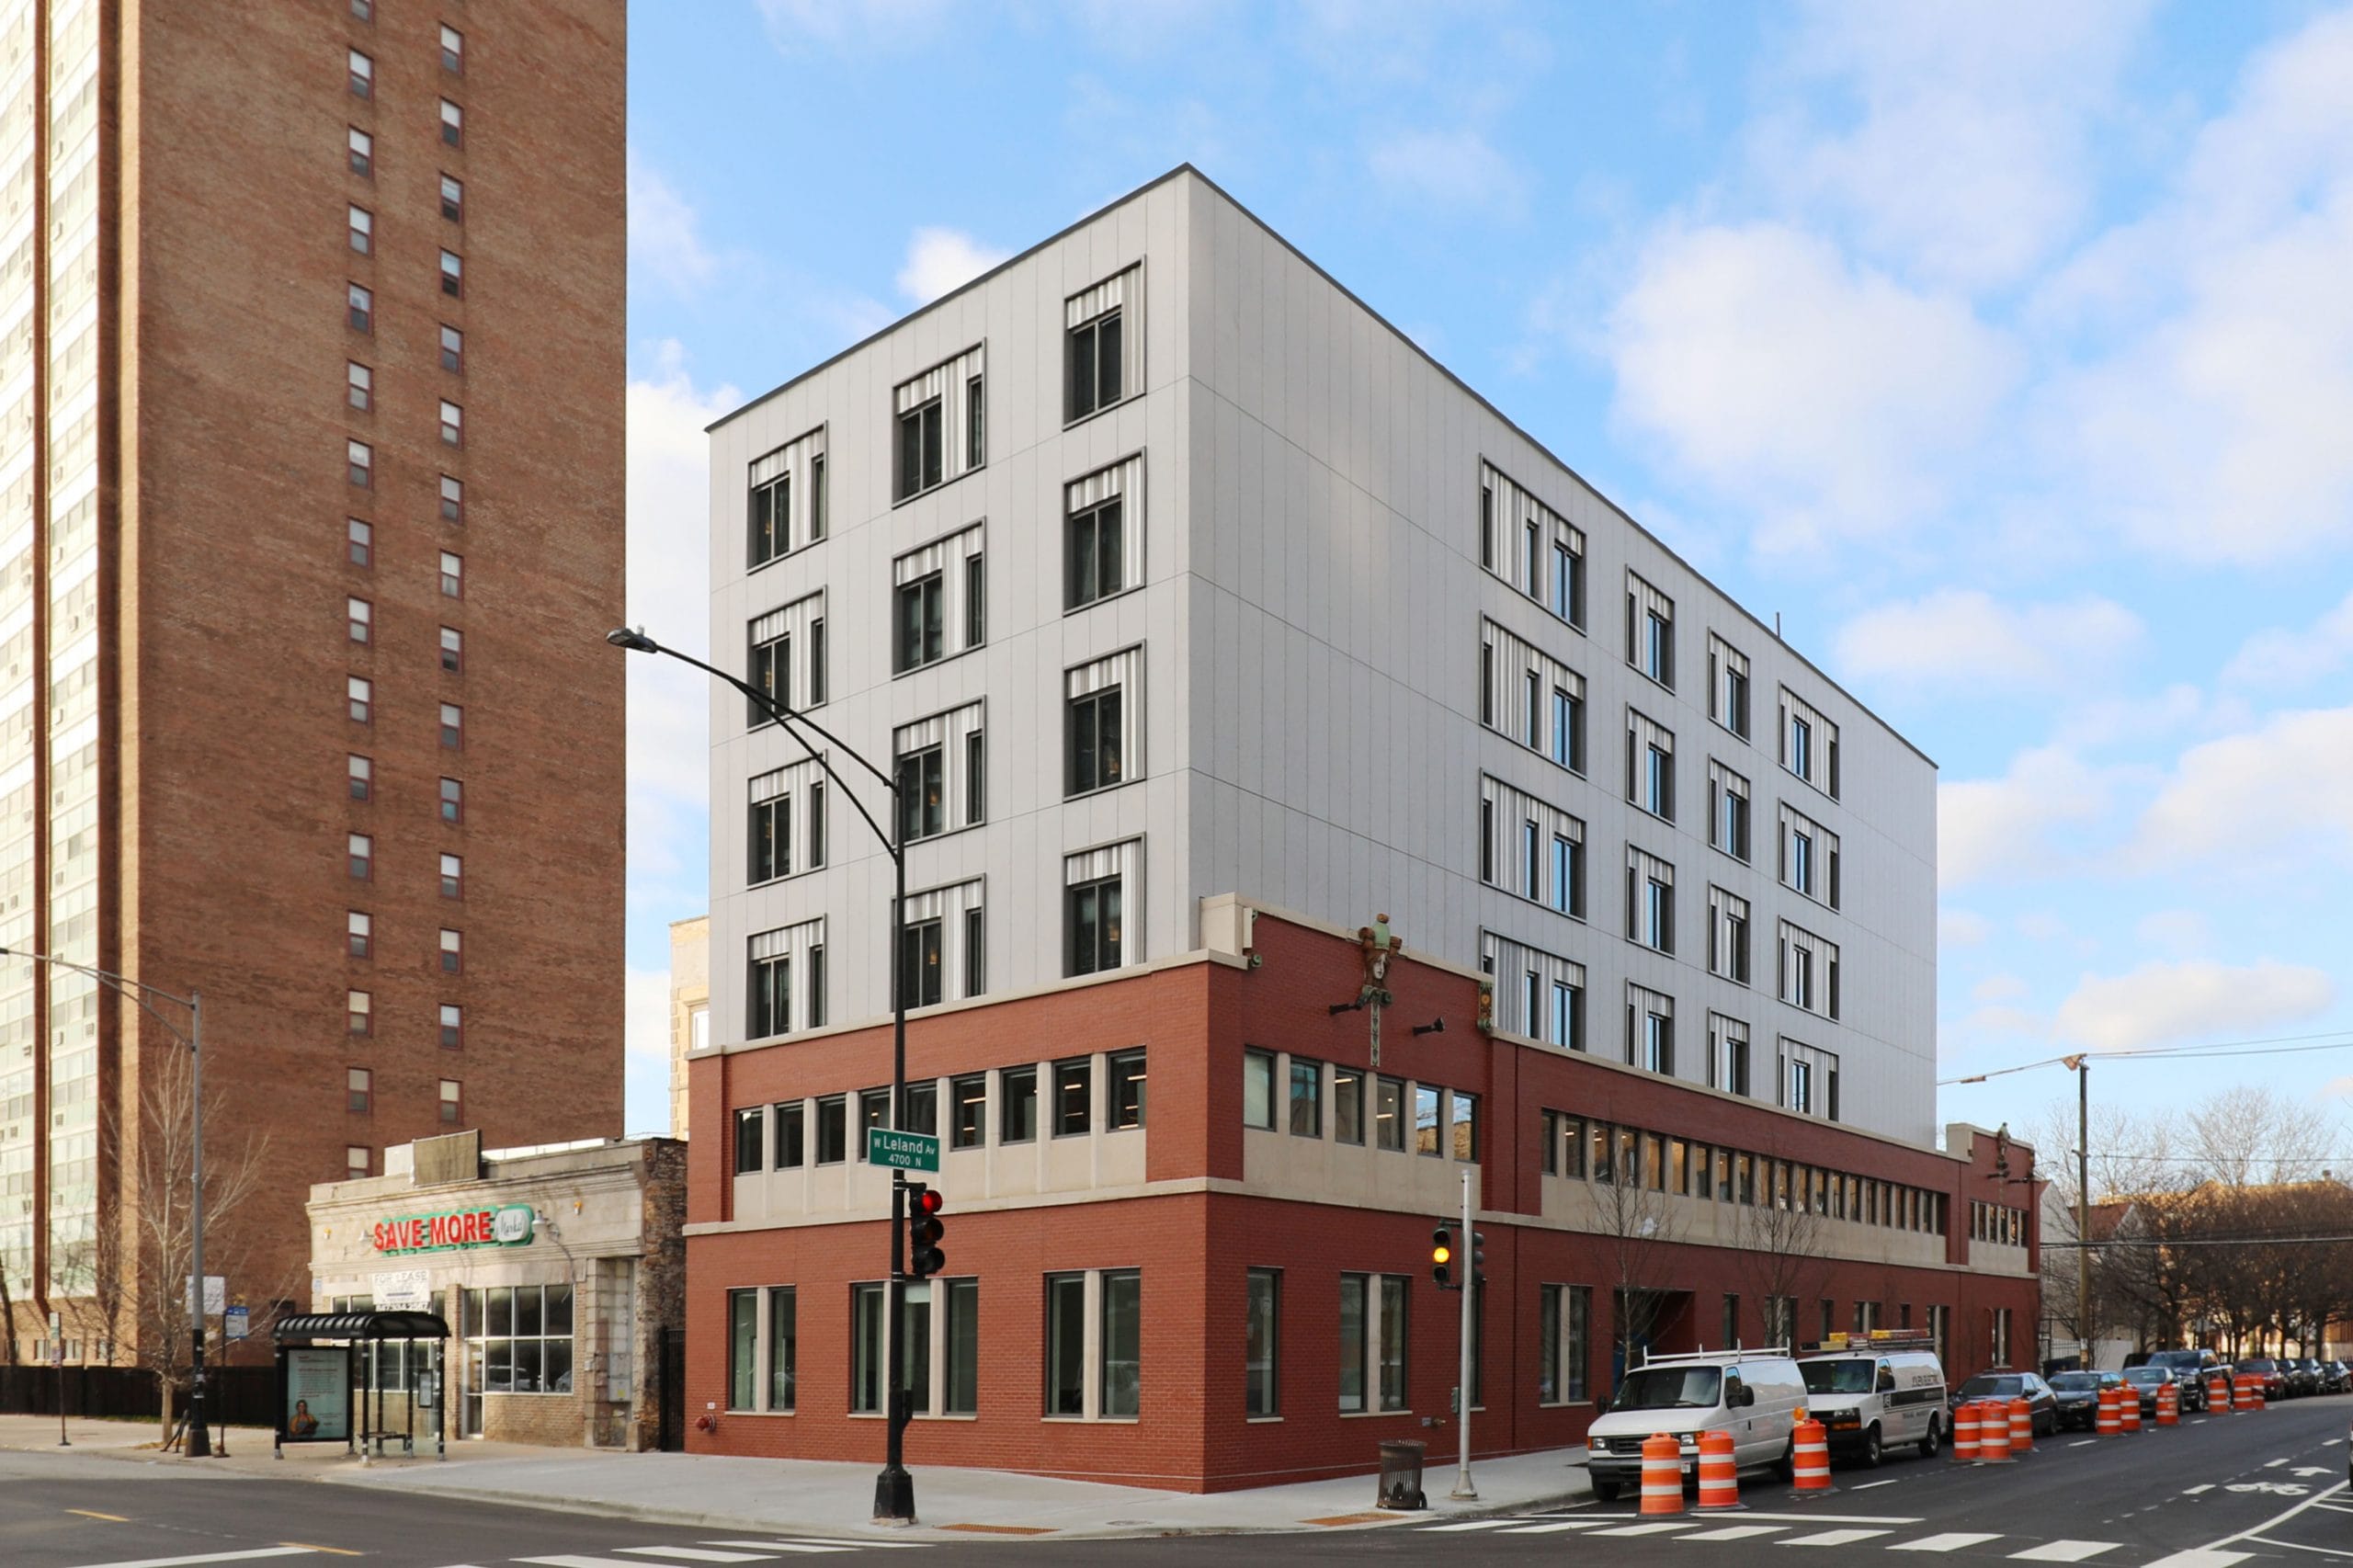 Skender Completes Construction on Sarah’s Circle’s Six-story Supportive Housing Facility for Women on Chicago’s North Side